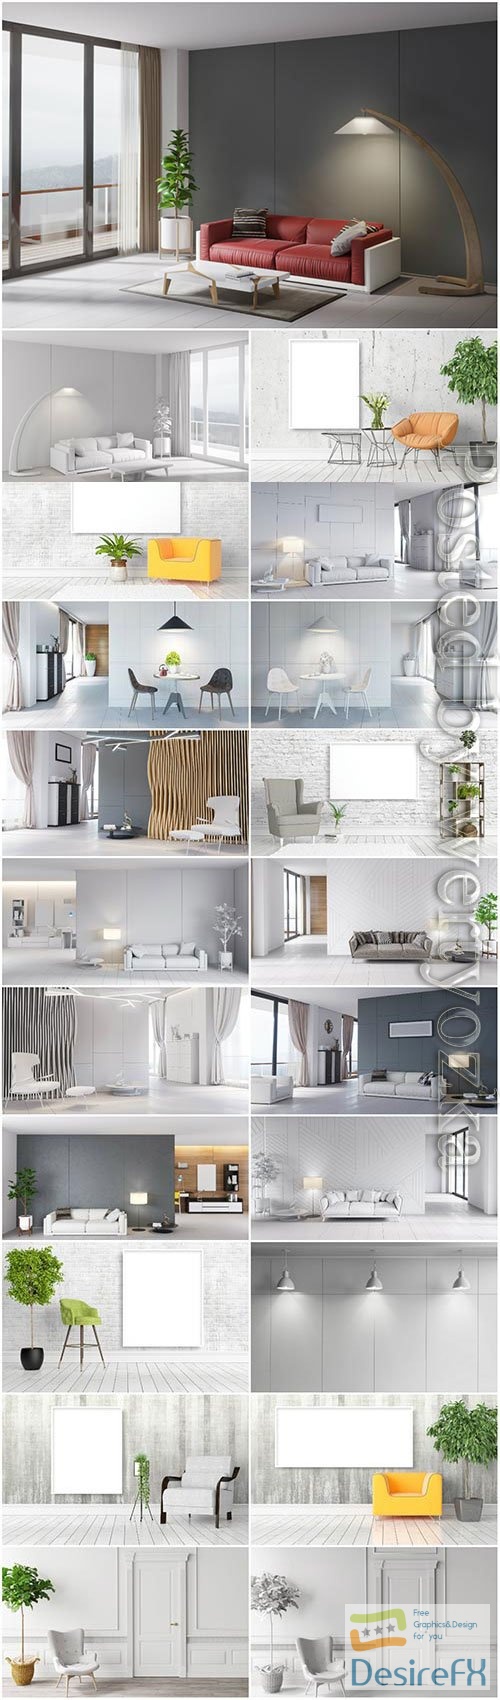 Modern interior in light colors stock photo